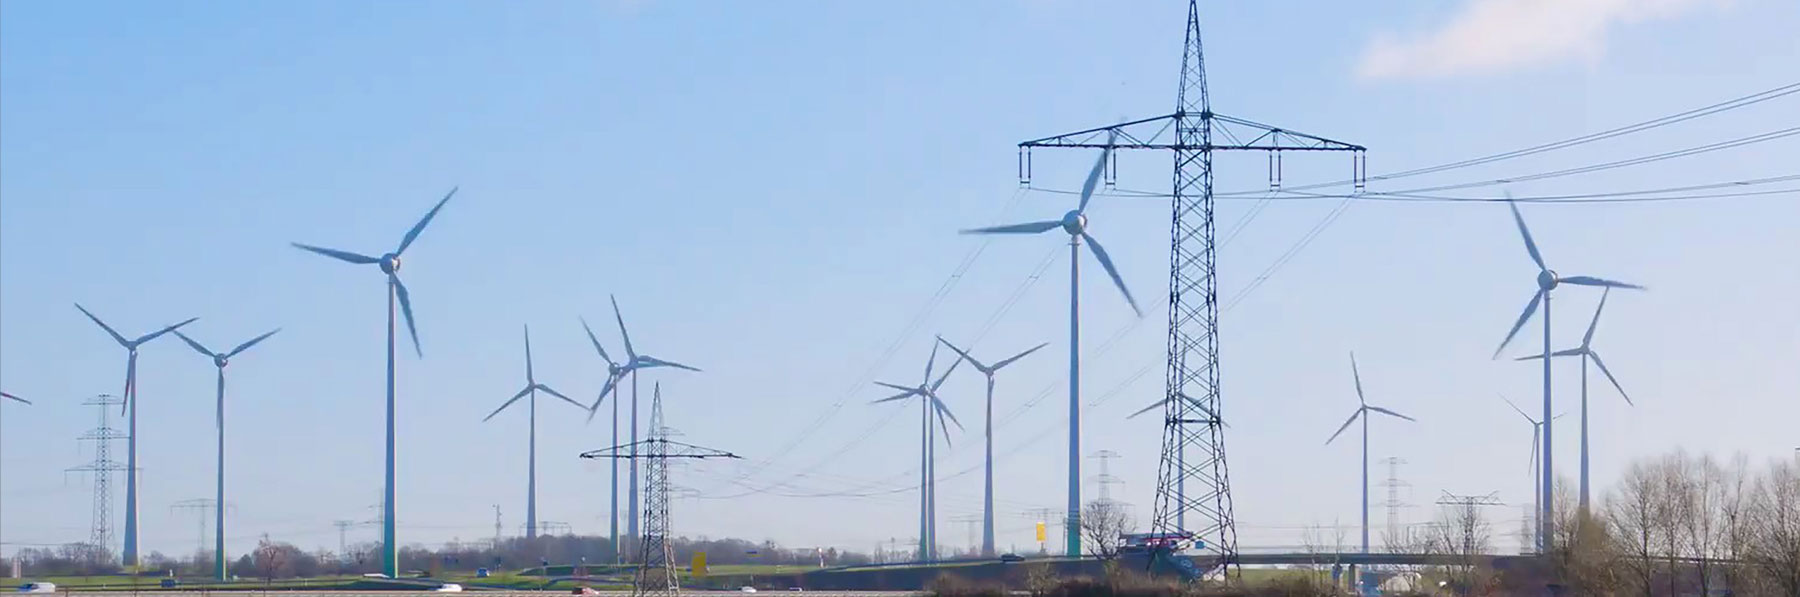 Highway with wind turbines and transmission line thumb